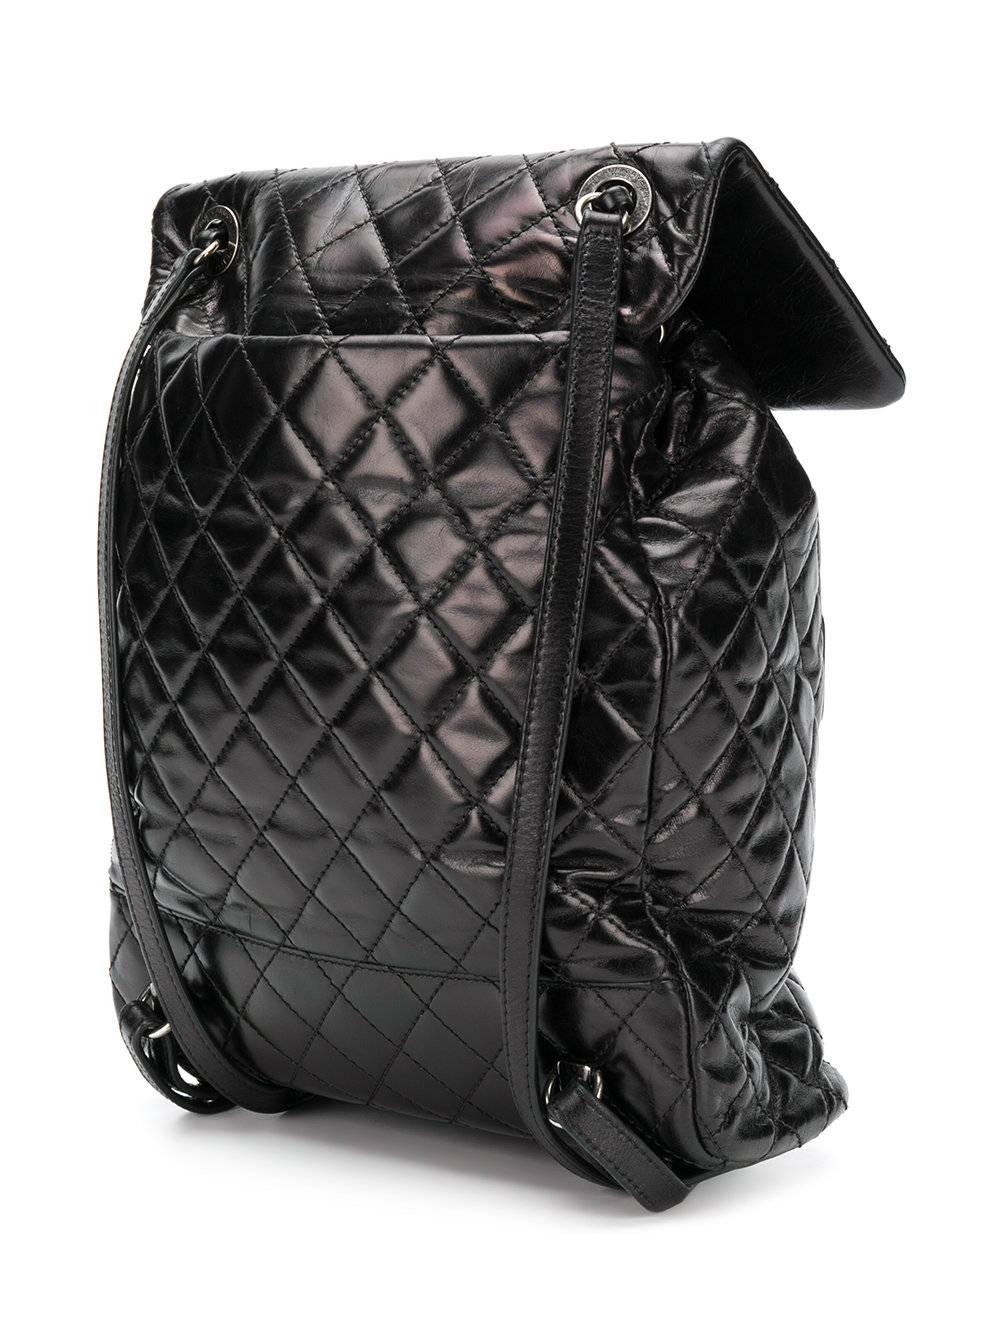 This Chanel backpack is a modern twist on a timeless classic, featuring a foldover top, clasp closer, a front zip pocket, shoulder straps, a quilted effect set off by the silver-tone hardware. This is the perfect bag for any girl on the go,